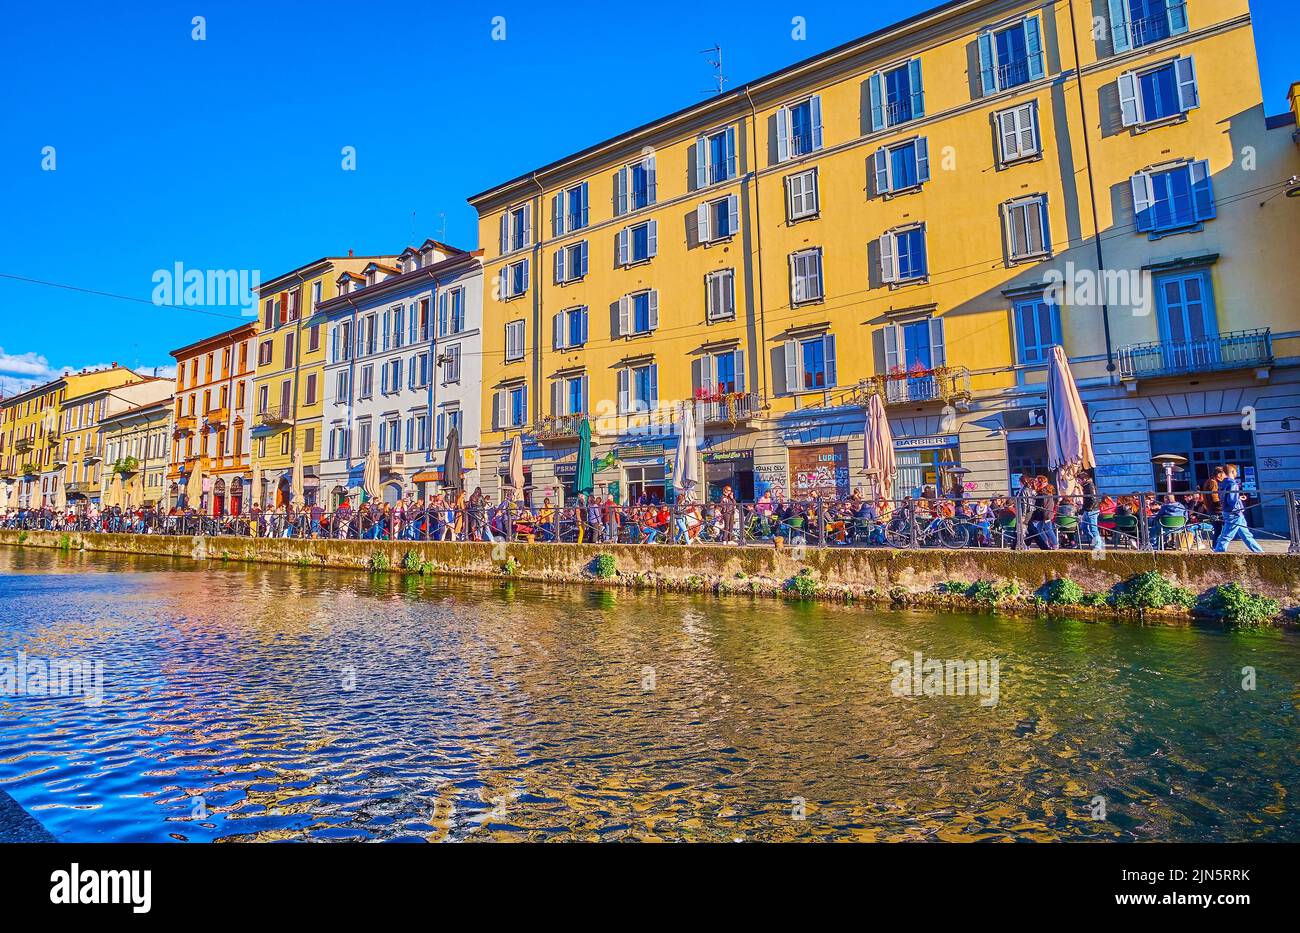 MILAN, ITALY - APRIL 9, 2022: Outdoor evening restaurants along historical houses on Naviglio Grande Canal, on April 9 in Milan, Italy Stock Photo